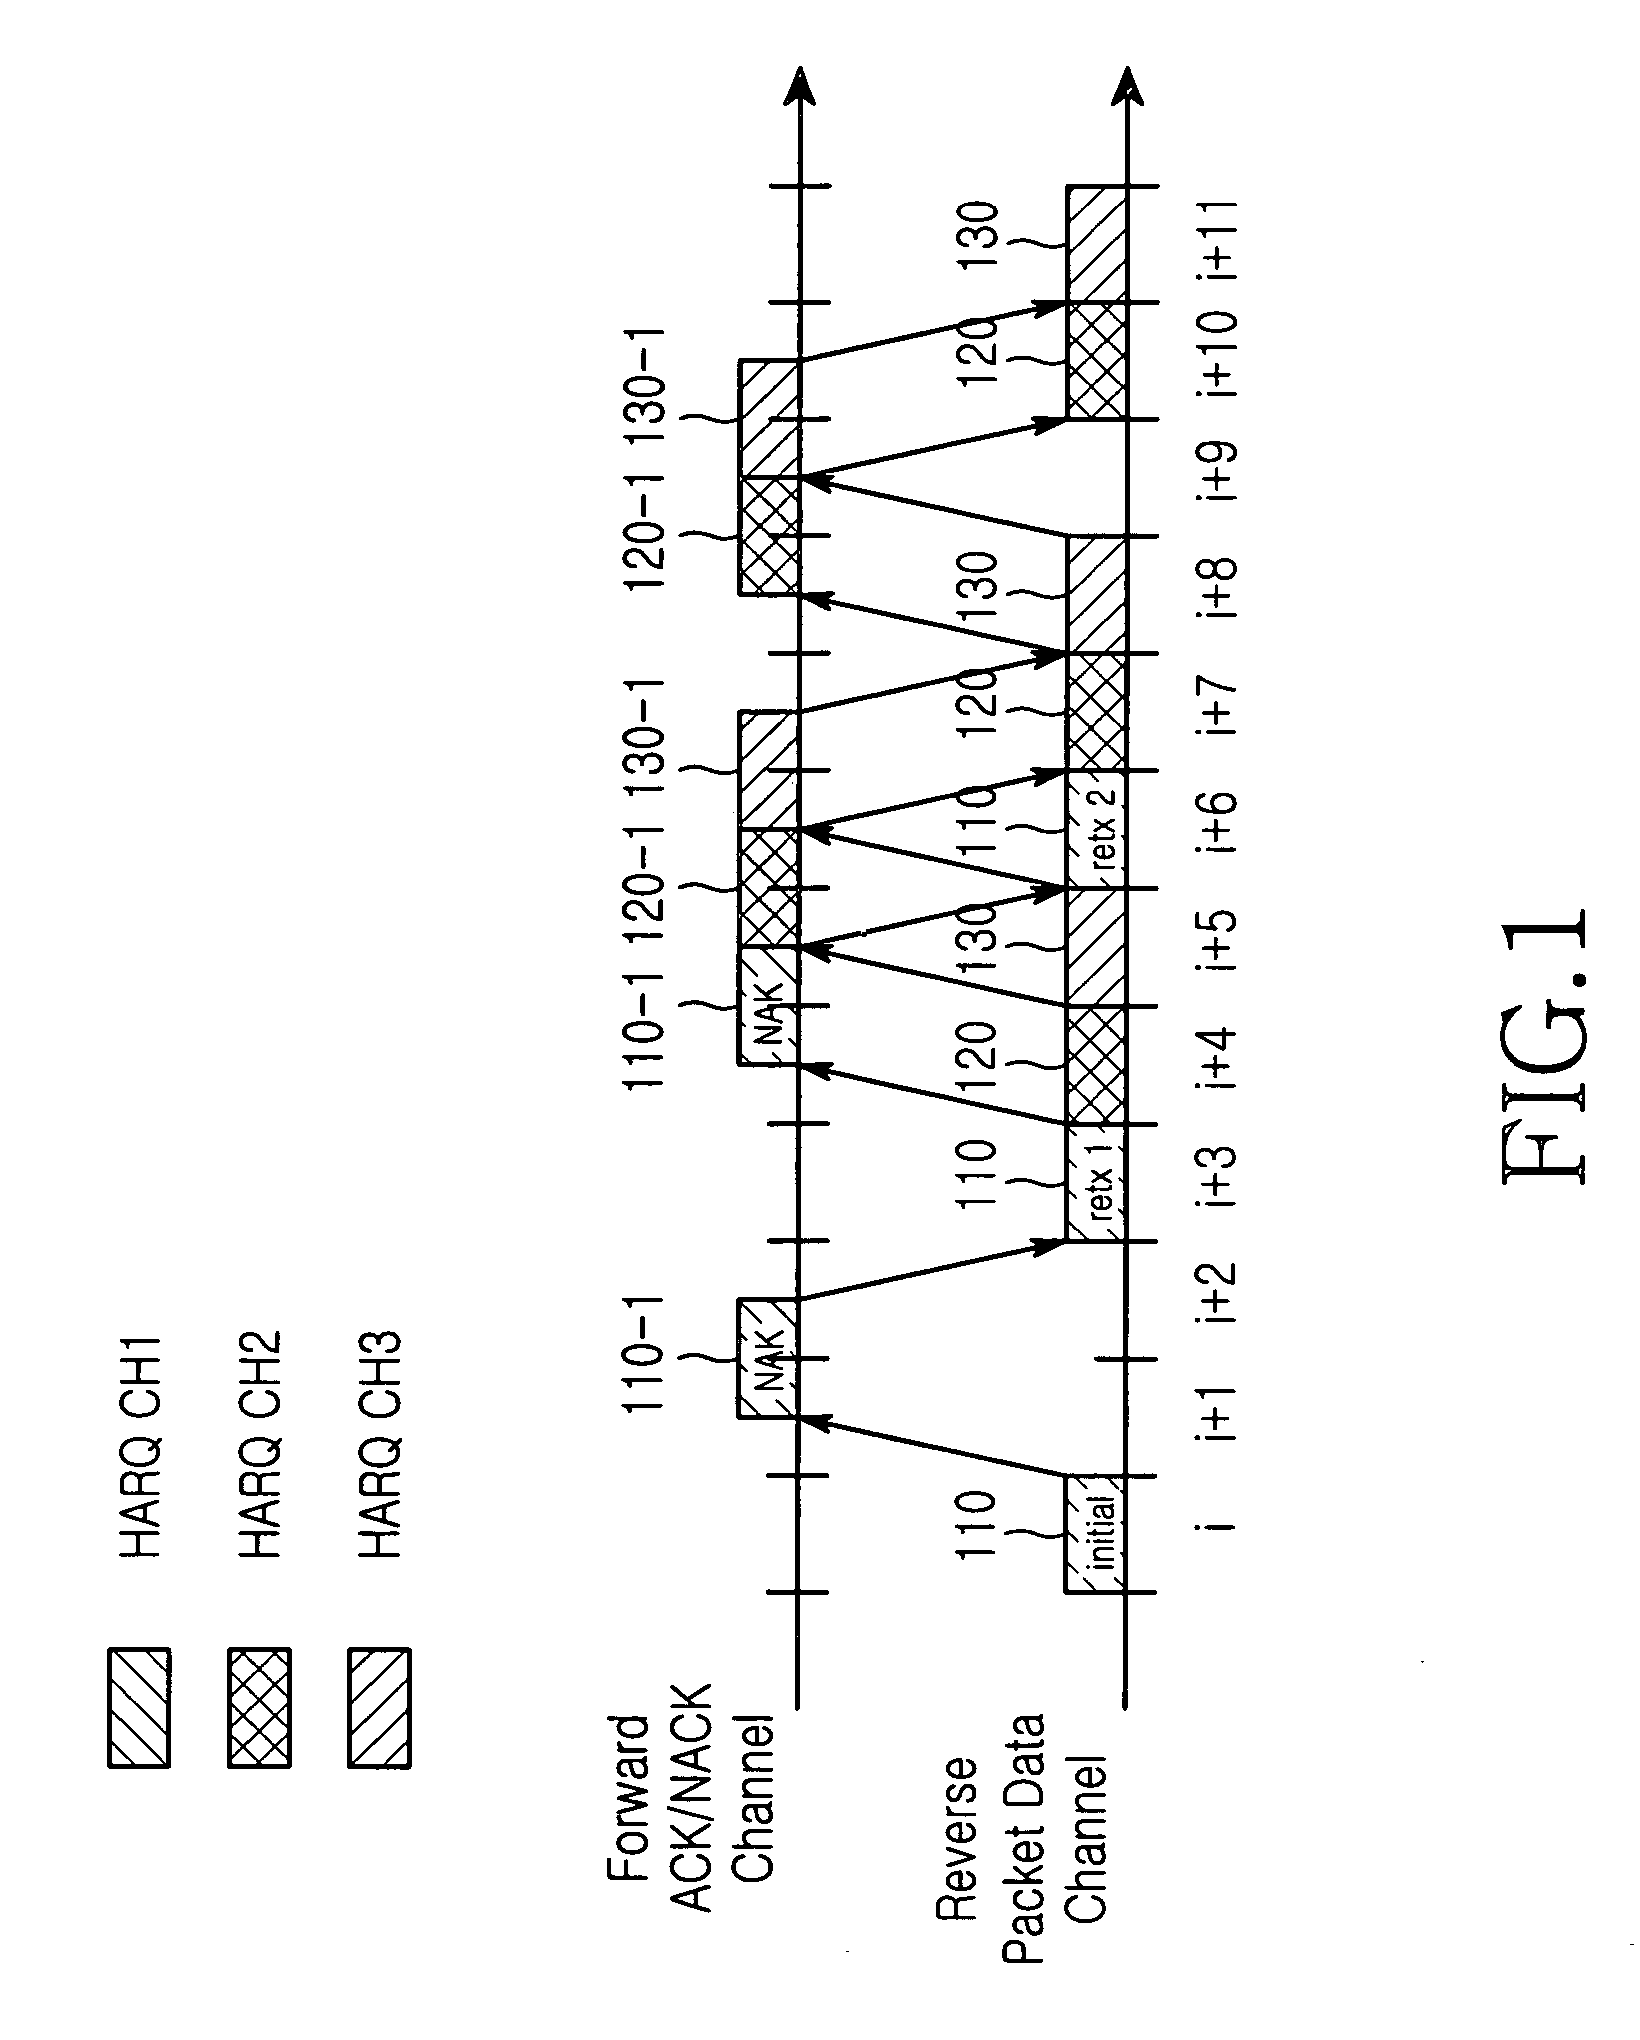 Apparatus and method for assigning channel in a mobile communication system using HARQ